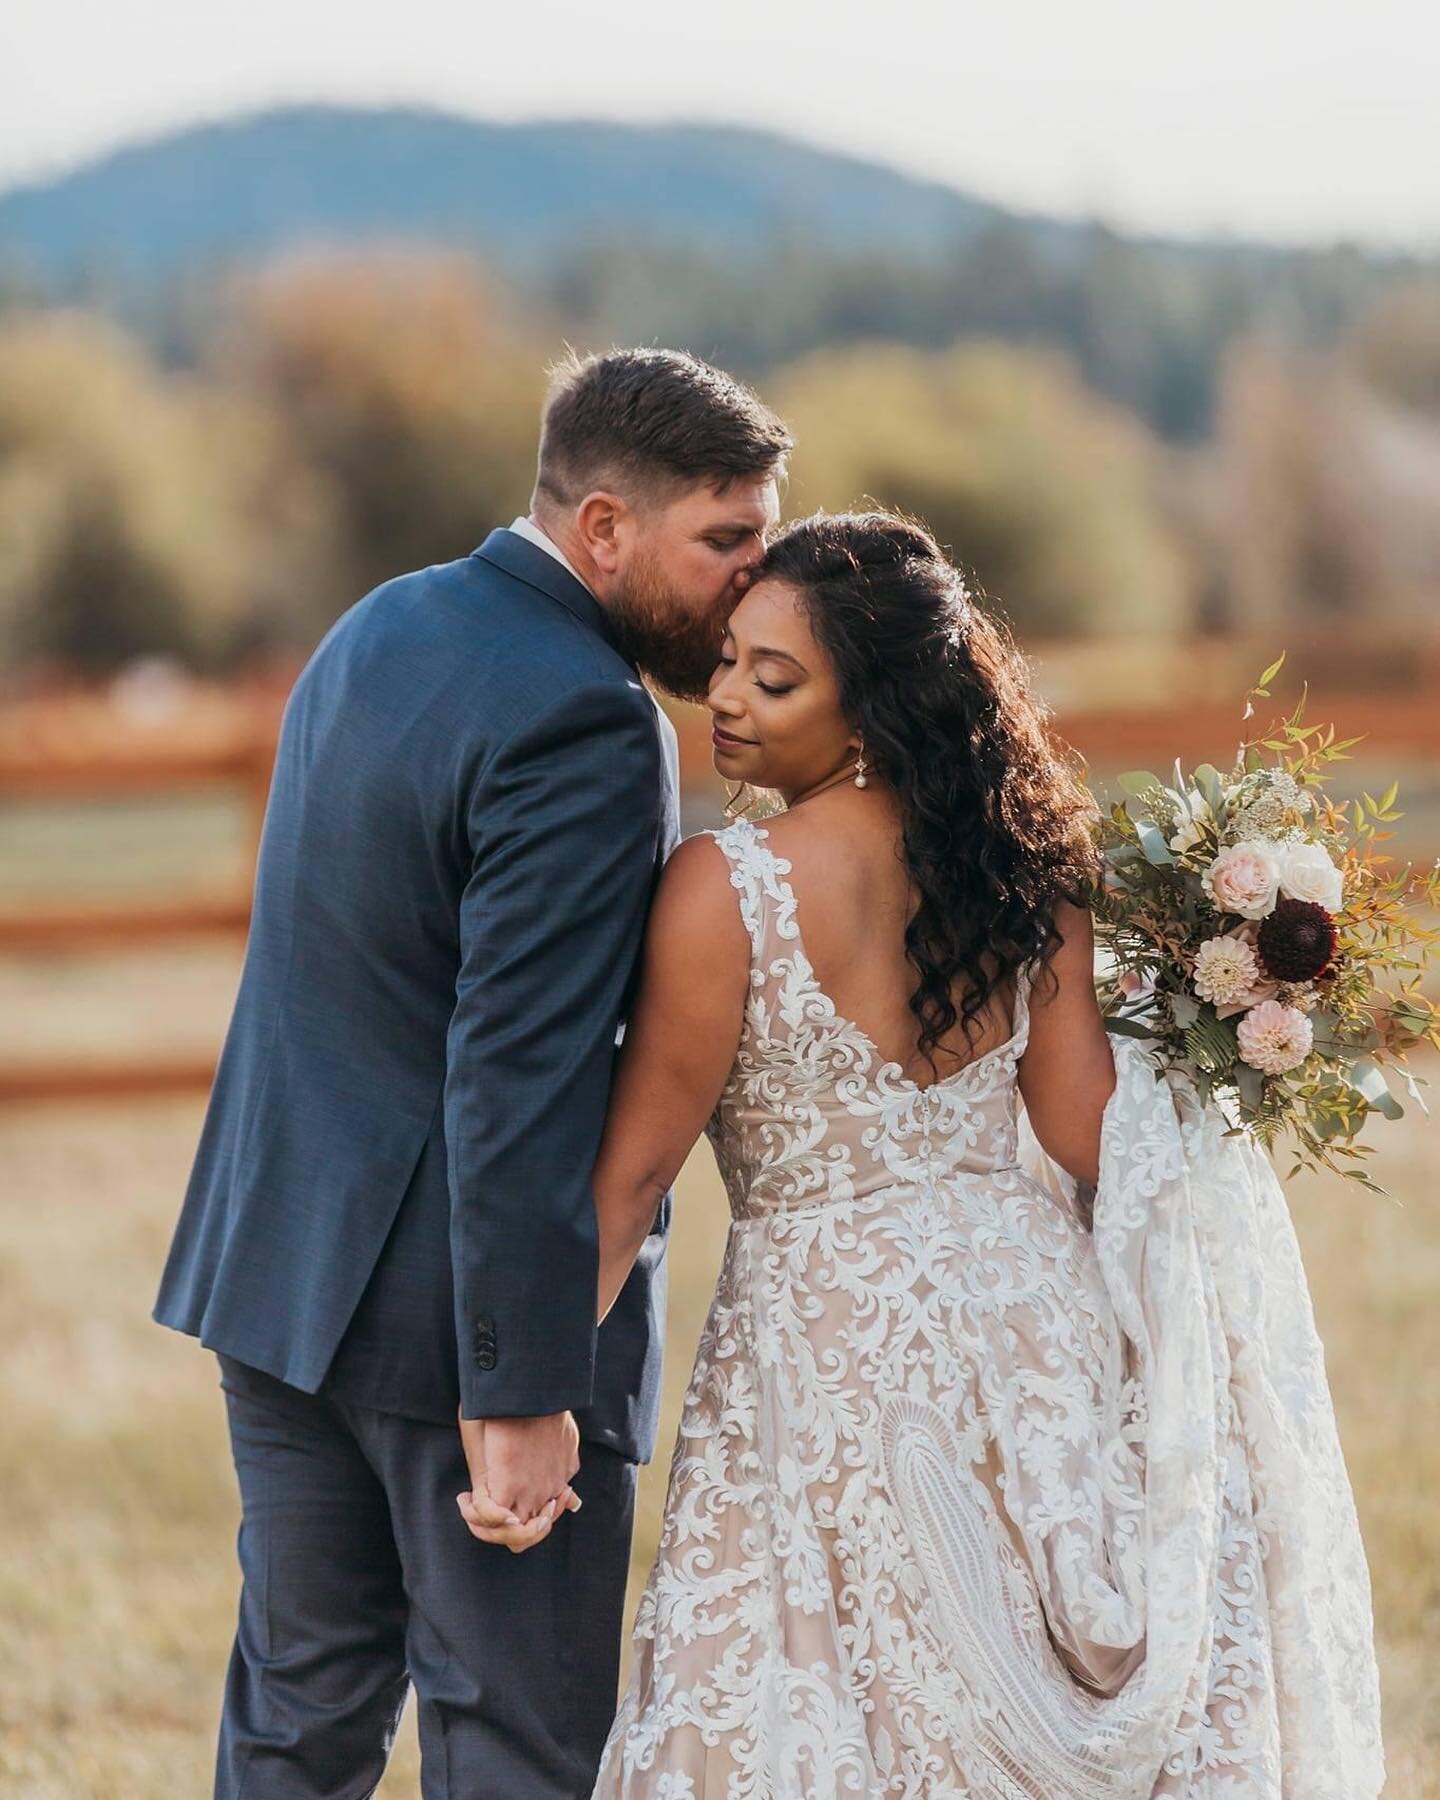 I&rsquo;m so excited for all the new 2021 couples (plus the rescheduled 2020 couples) and their weddings this year!  It is shaping up to be EPIC!!! 
.
.
.
#blackbutteranchwedding #blackbutteranch #centraloregonwedding #bendoregon #sistersoregon #sist